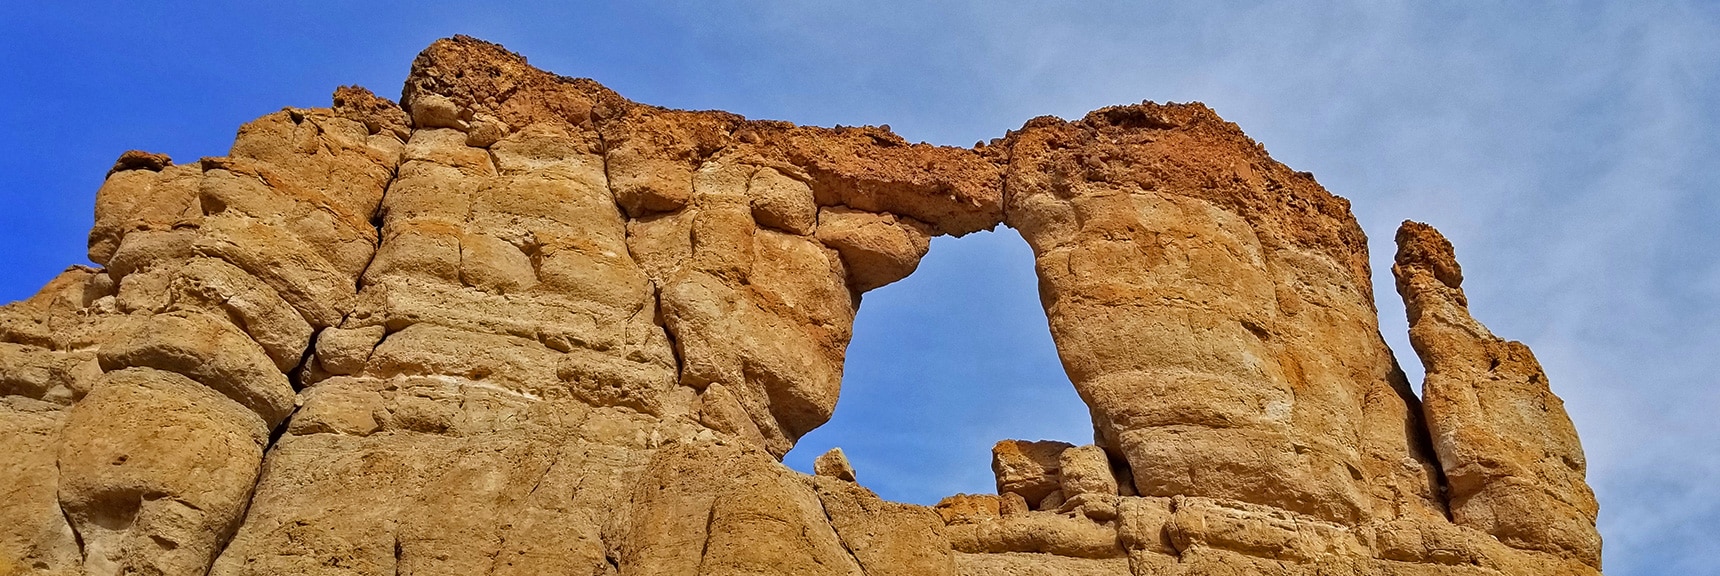 Liberty Bell Arch | Arizona Hot Spring | Liberty Bell Arch | Lake Mead National Recreation Area, Arizona